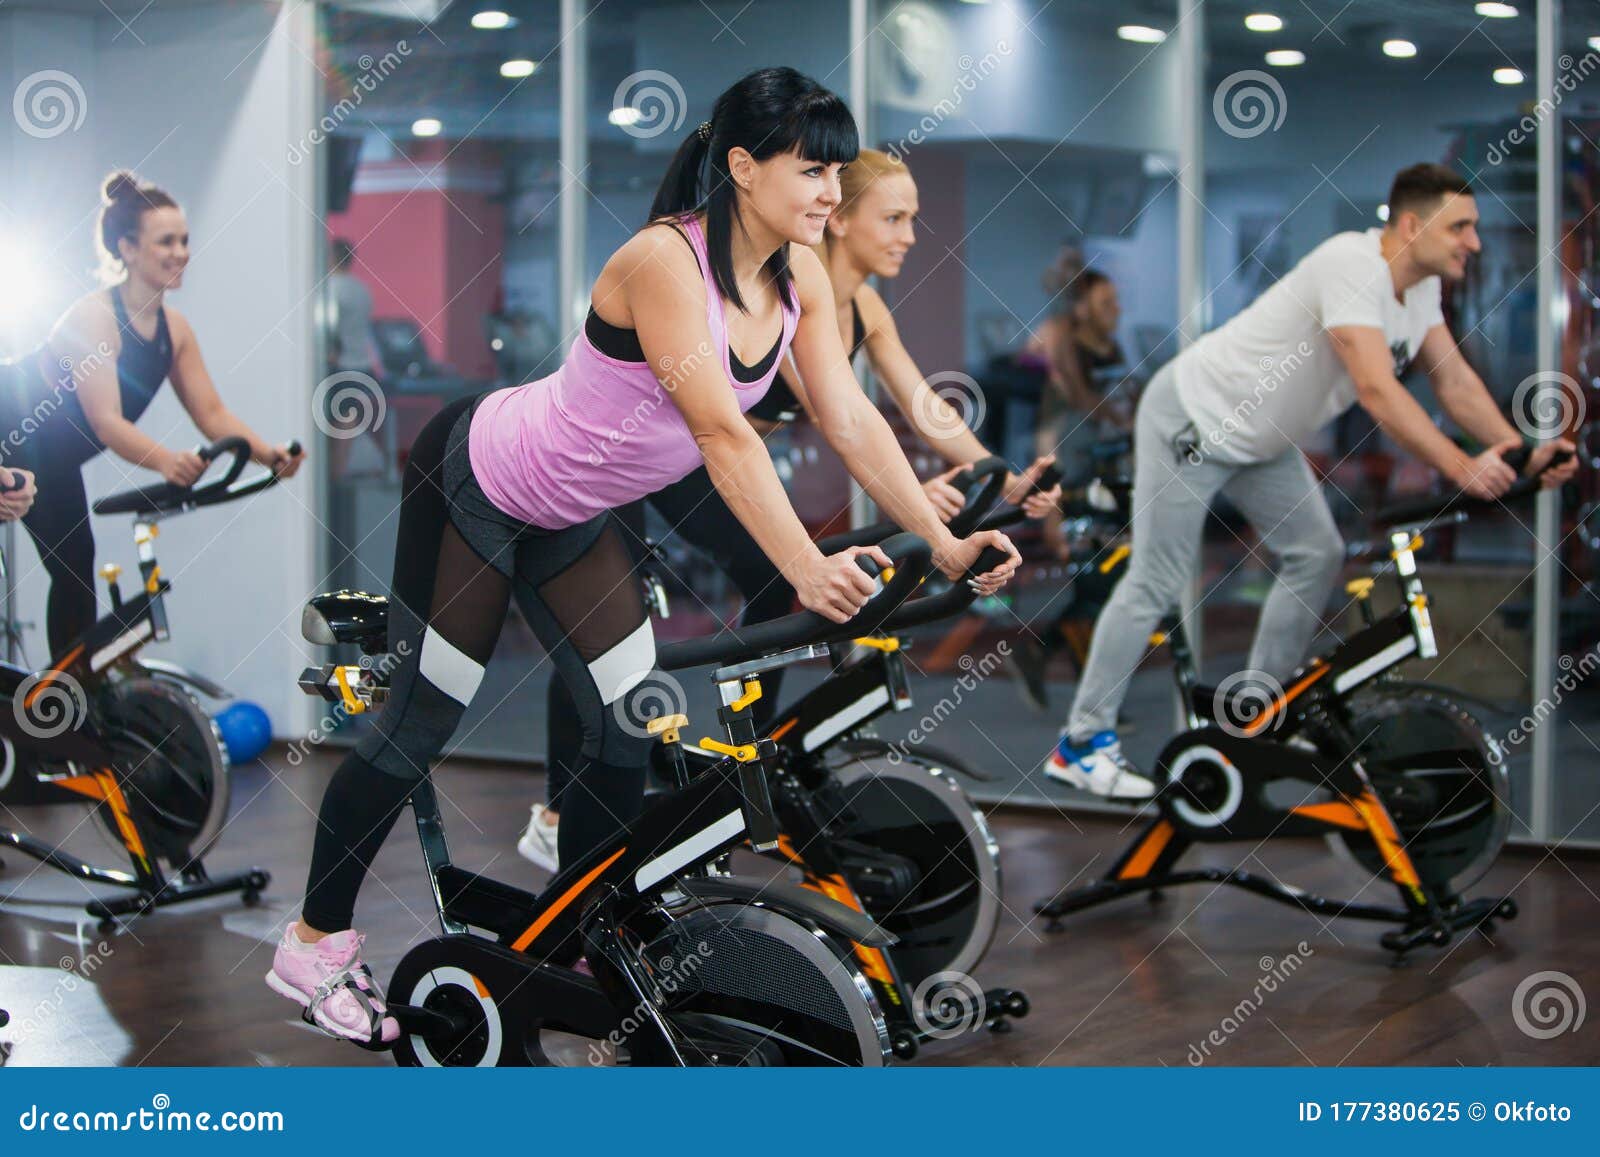 Cycling Class in Fitness Club, Group of Fit People Spinning on Cardio  Machine Stock Image - Image of cardio, exercising: 177380625